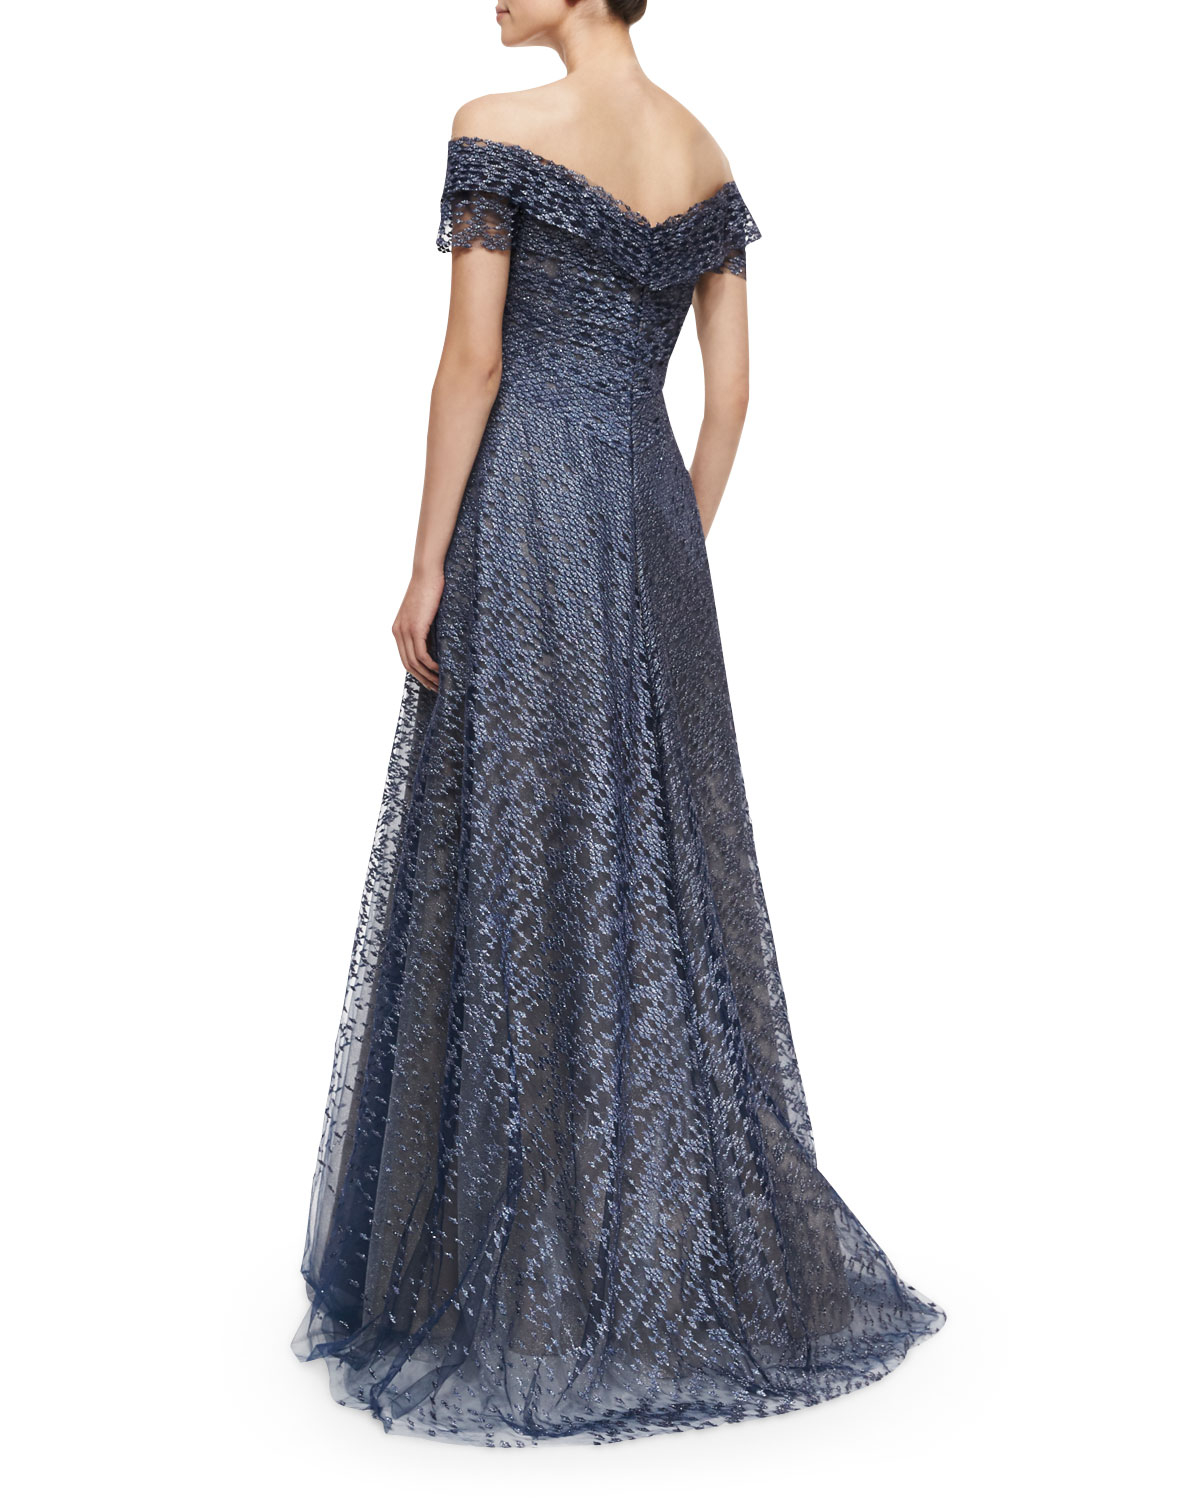 Lyst - Rene Ruiz Off-the-shoulder Lace Ball Gown in Blue